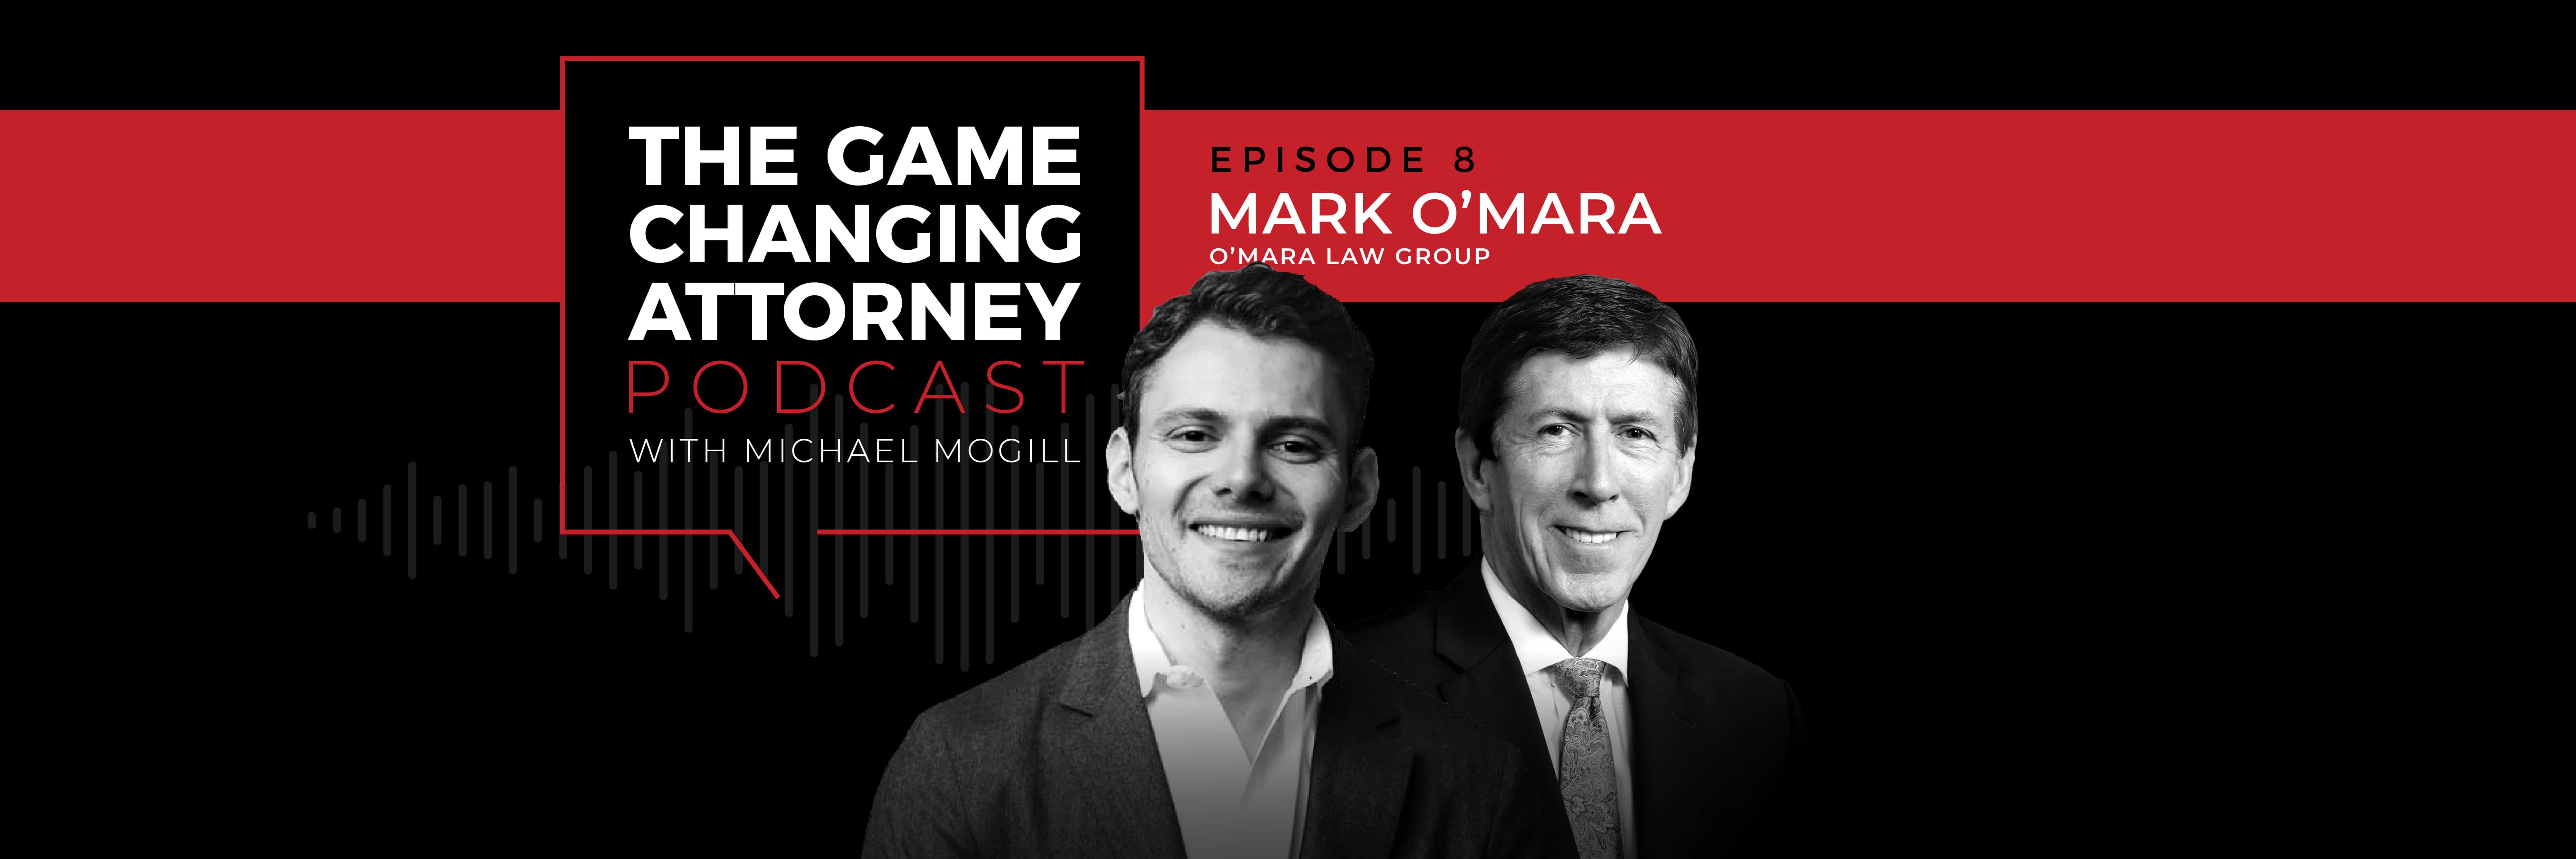 Mark O'Mara - The Game Changing Attorney Podcast - Desktop